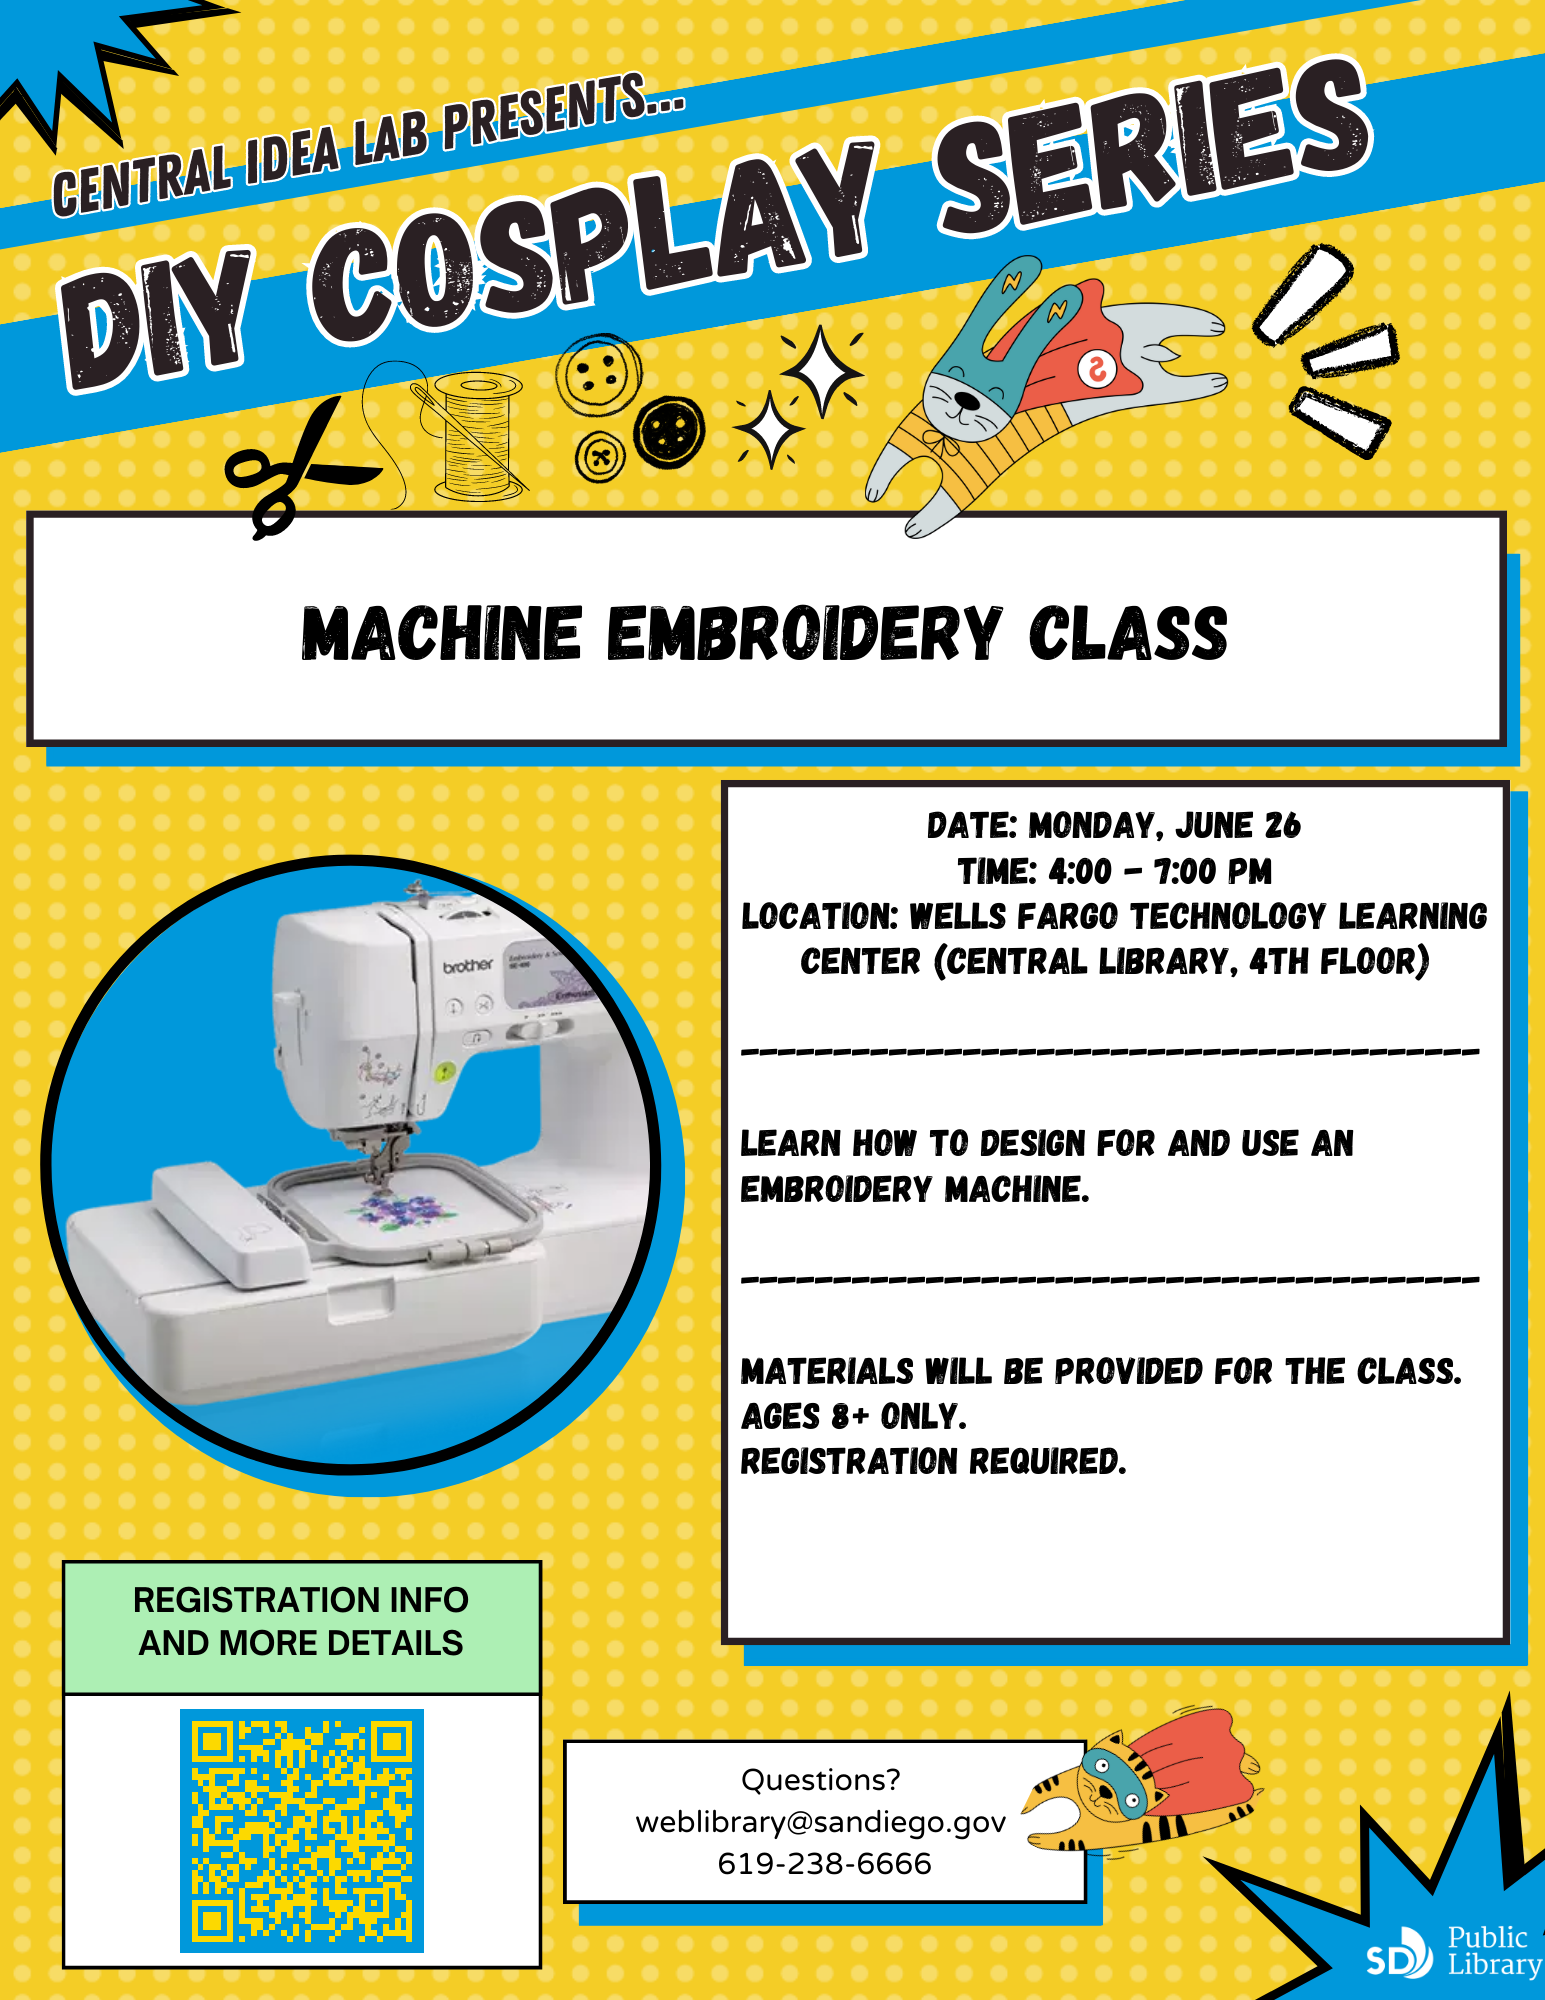 DIY Cosplay Series: Machine embroidery